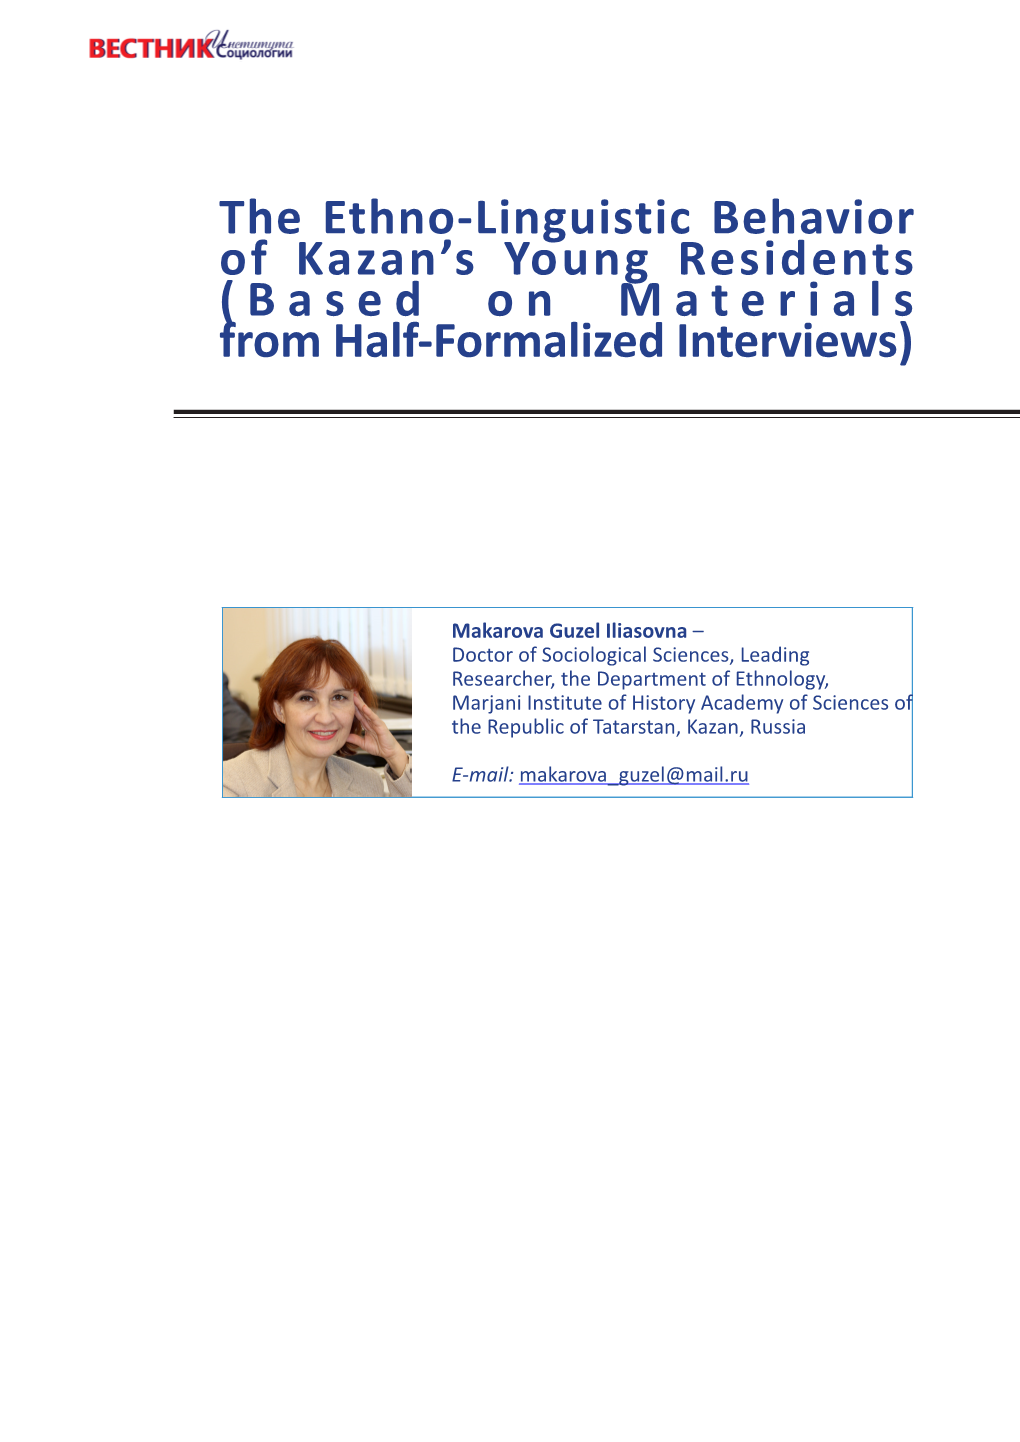 The Ethno-Linguistic Behavior of Kazan's Young Residents (Based